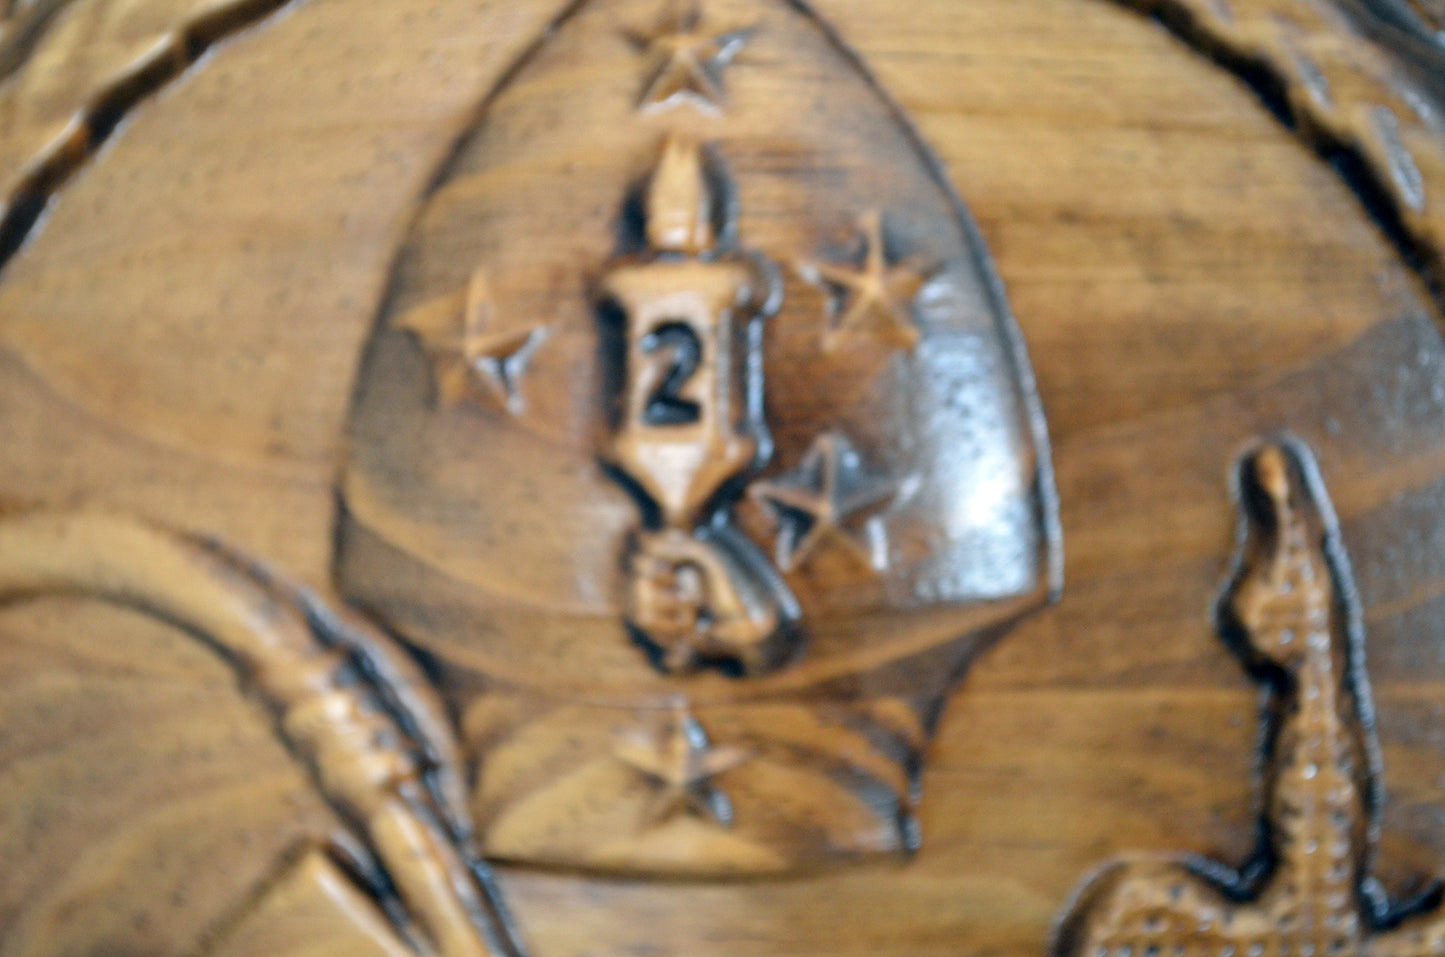 USMC 2nd Battalion 6th Marine Division, 3d wood carving, US Marine Corps